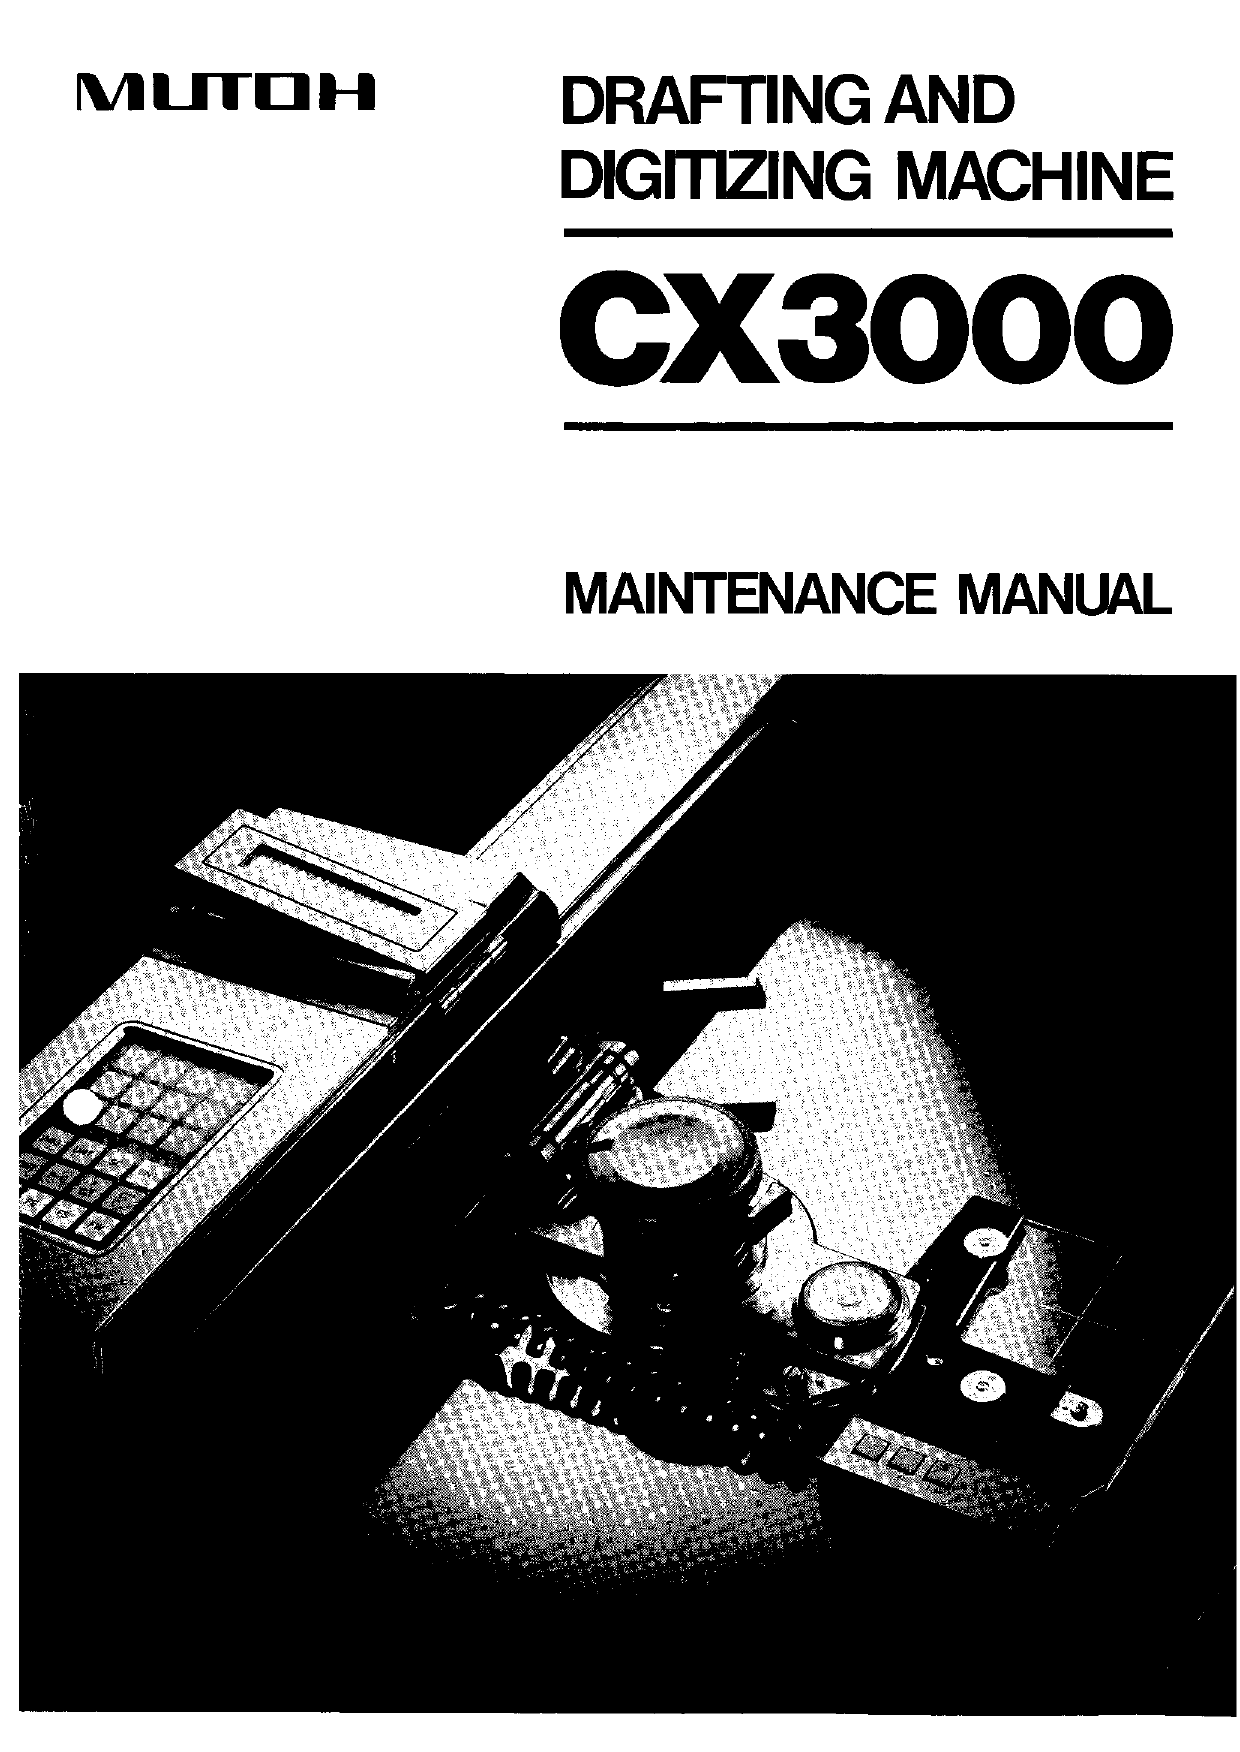 MUTOH CX 3000 MAINTENANCE Service and Parts Manual-1